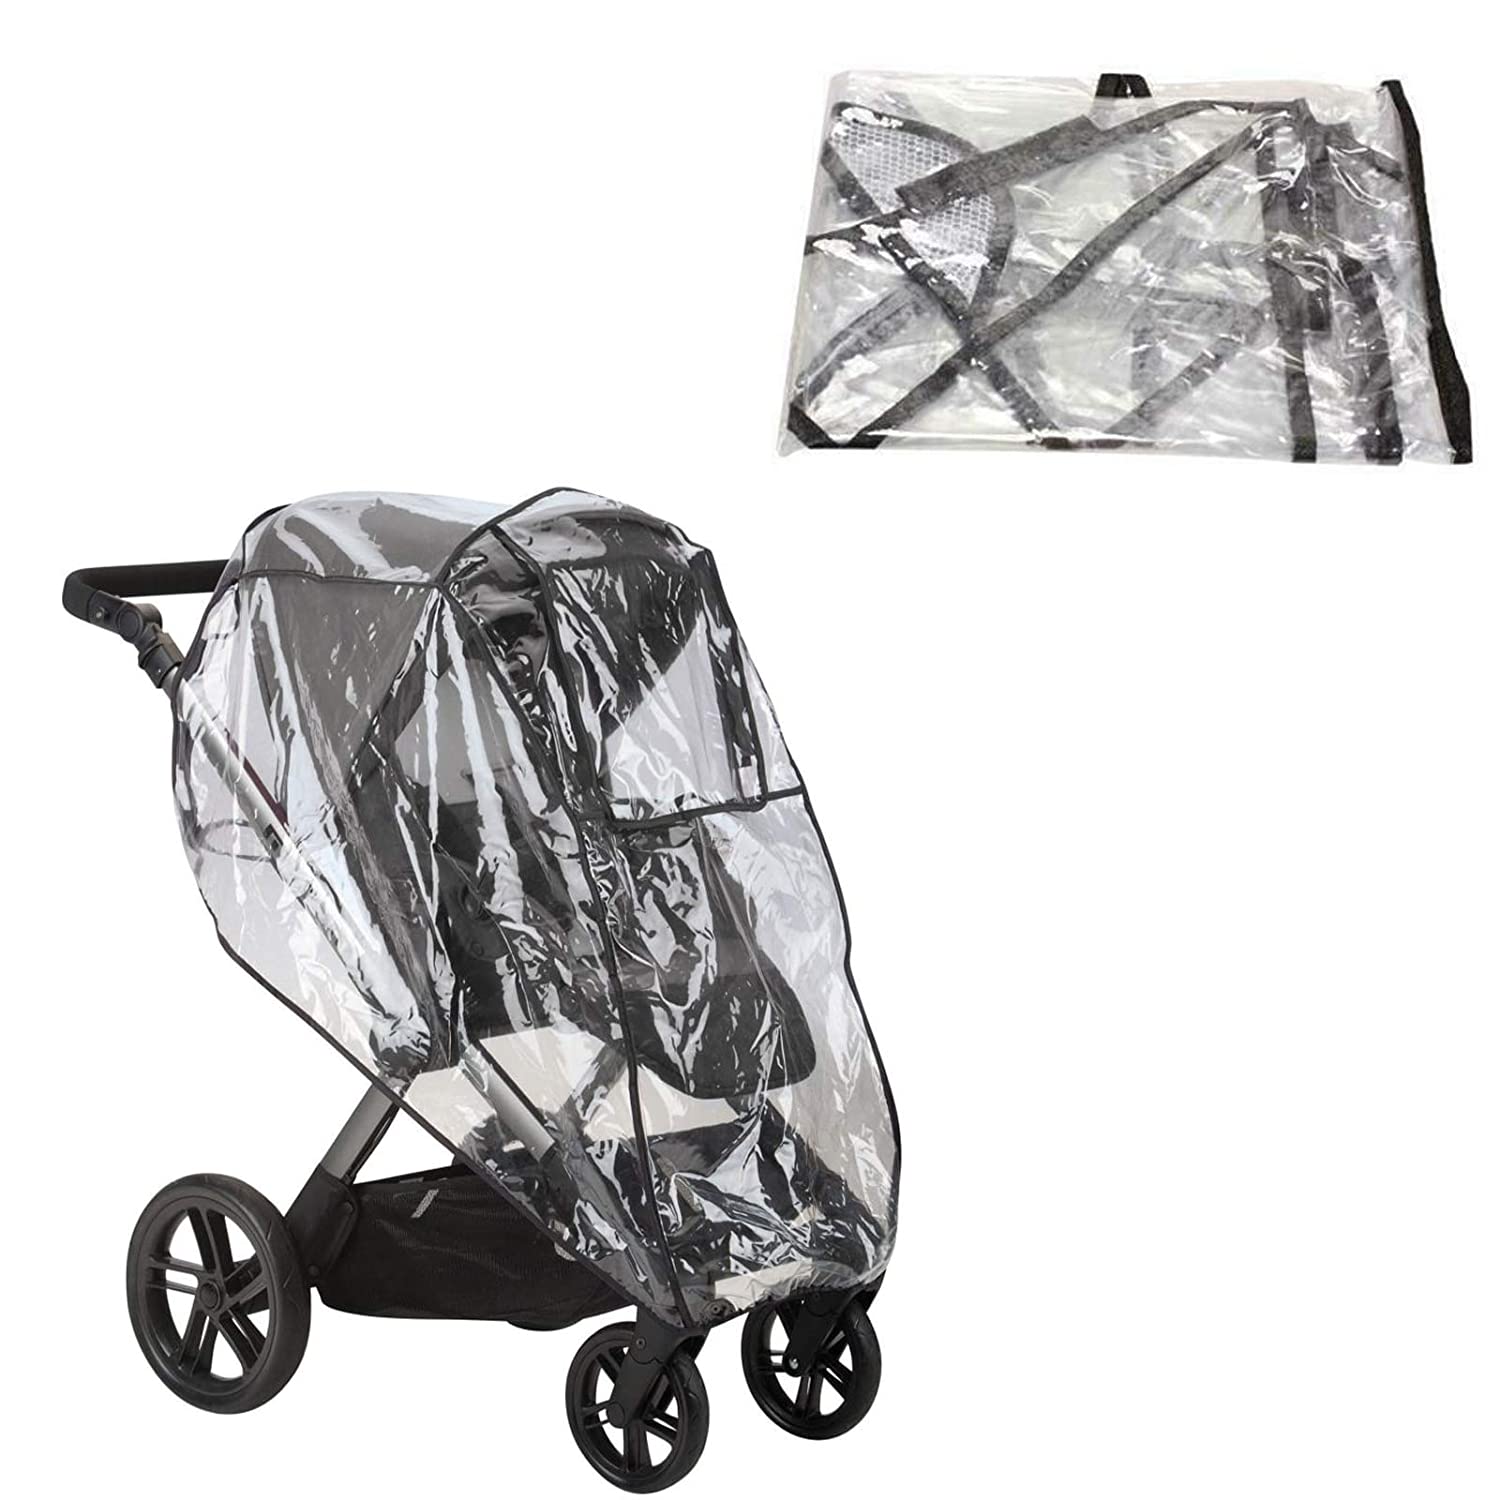 Universal Stroller Pram Rain Cover For Baby Pushchair Waterproof Non-Toxic Cover 